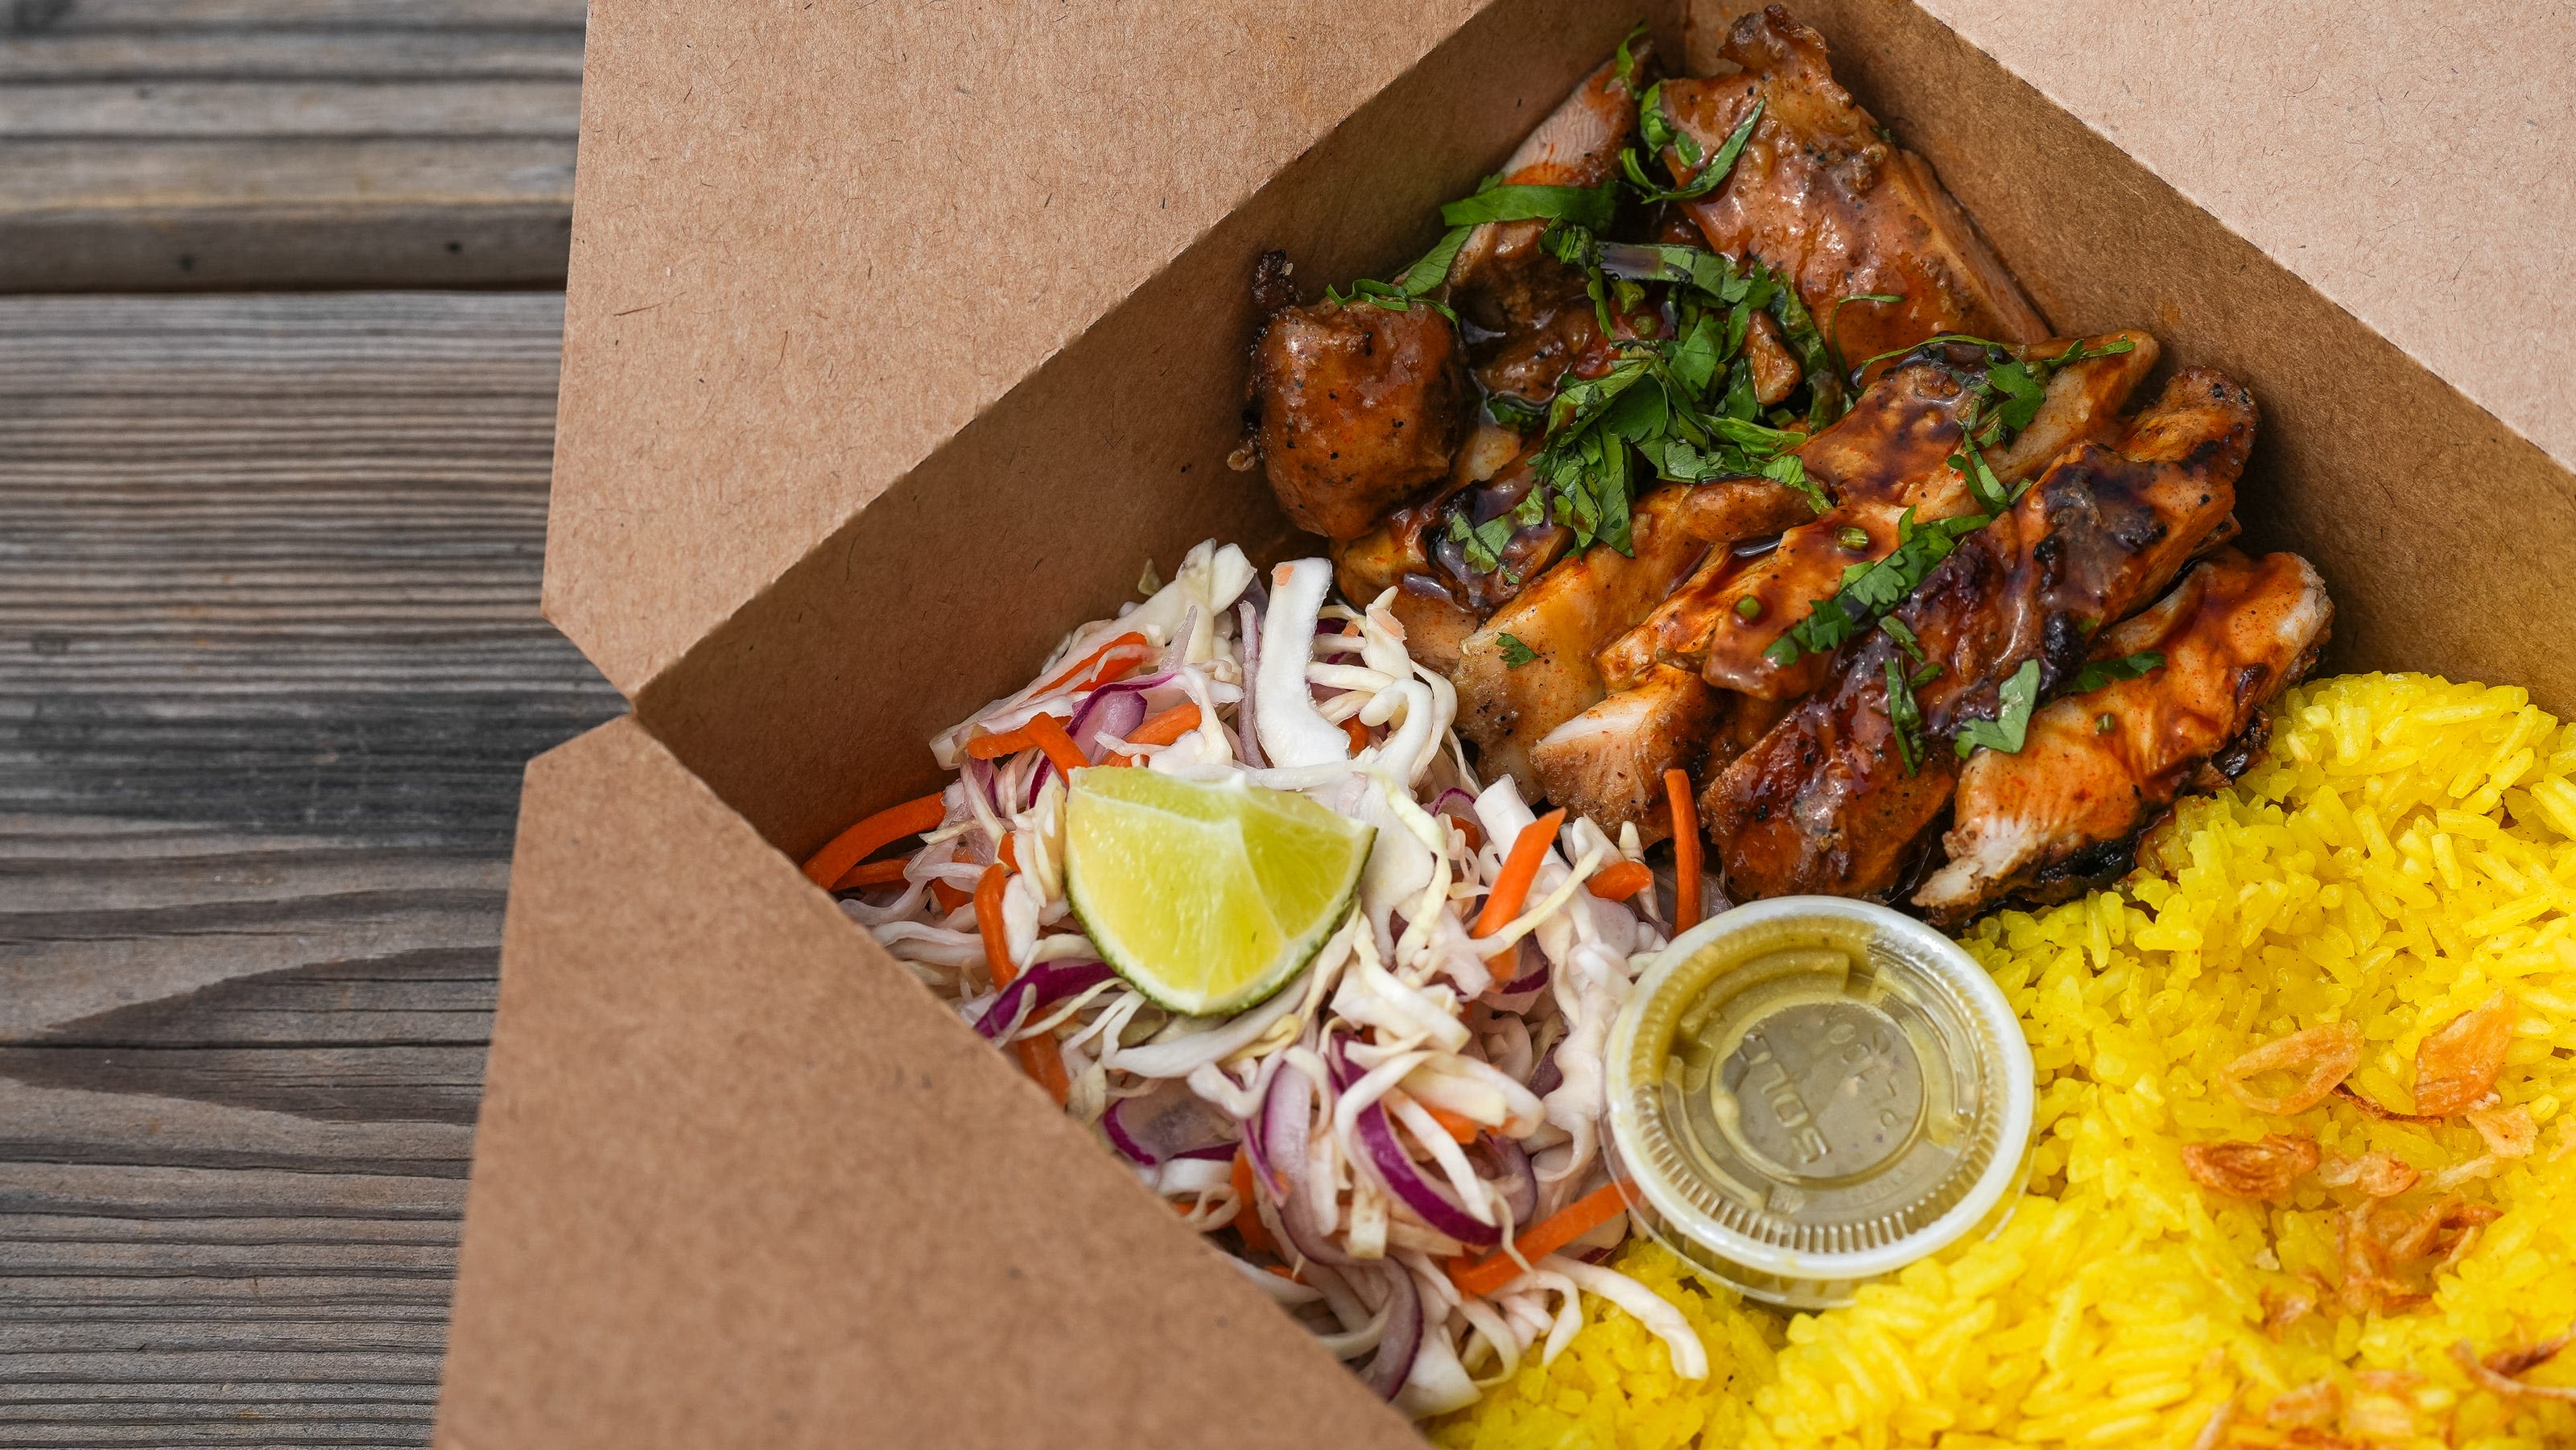 Beyond top Asian, Indonesian spot Yeni's Fusion is one of the best food trucks in Austin